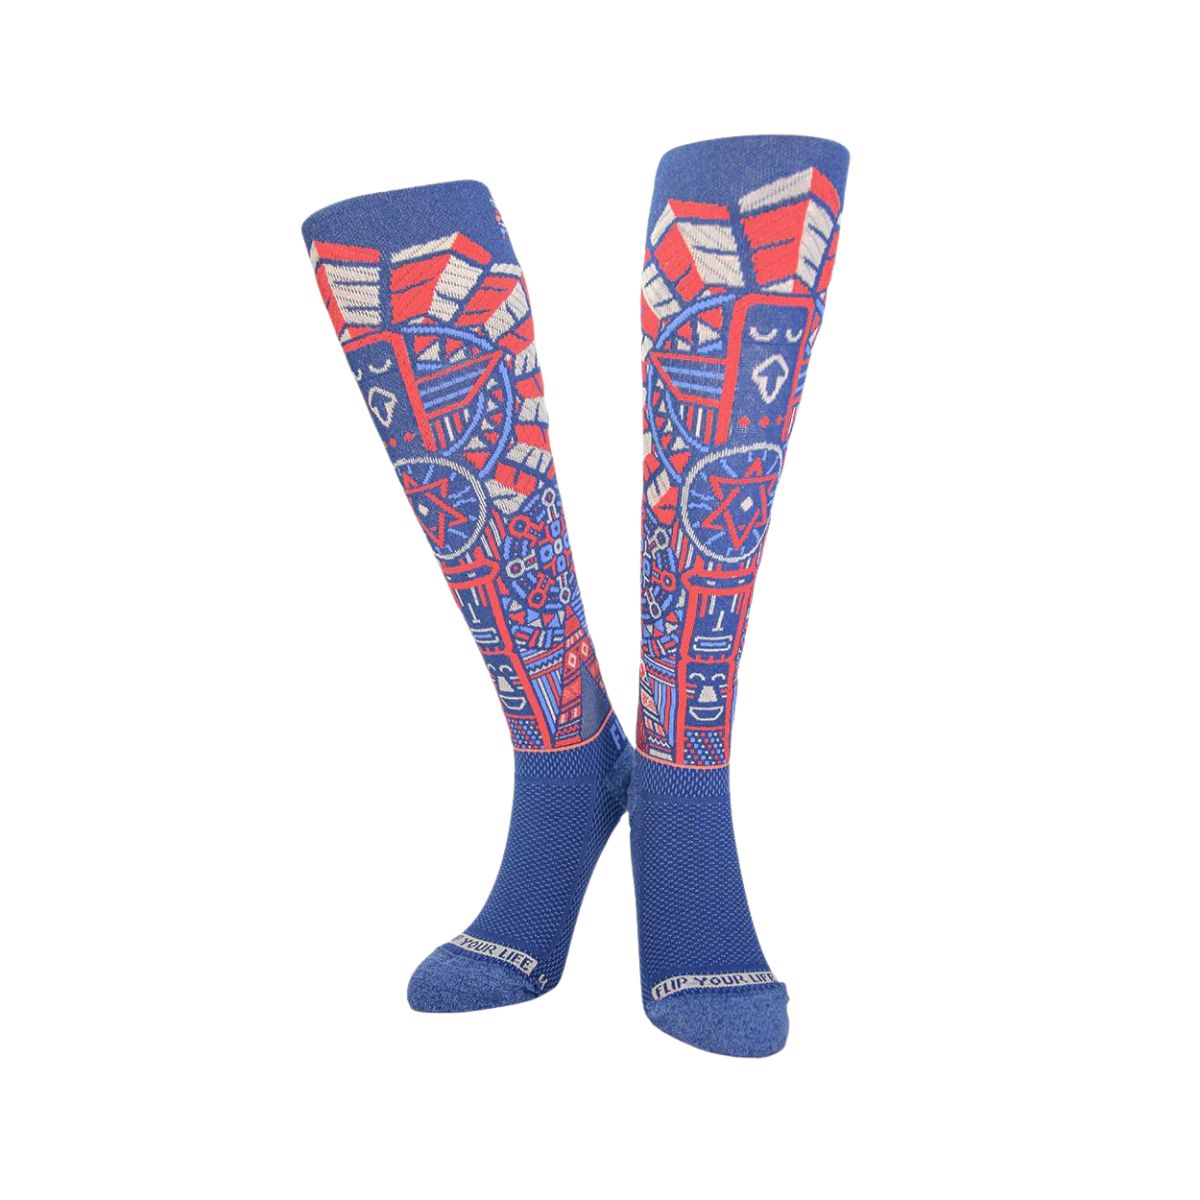 Sales FLIPPOS Compression Socks - Space Camp (Day) in vogue at